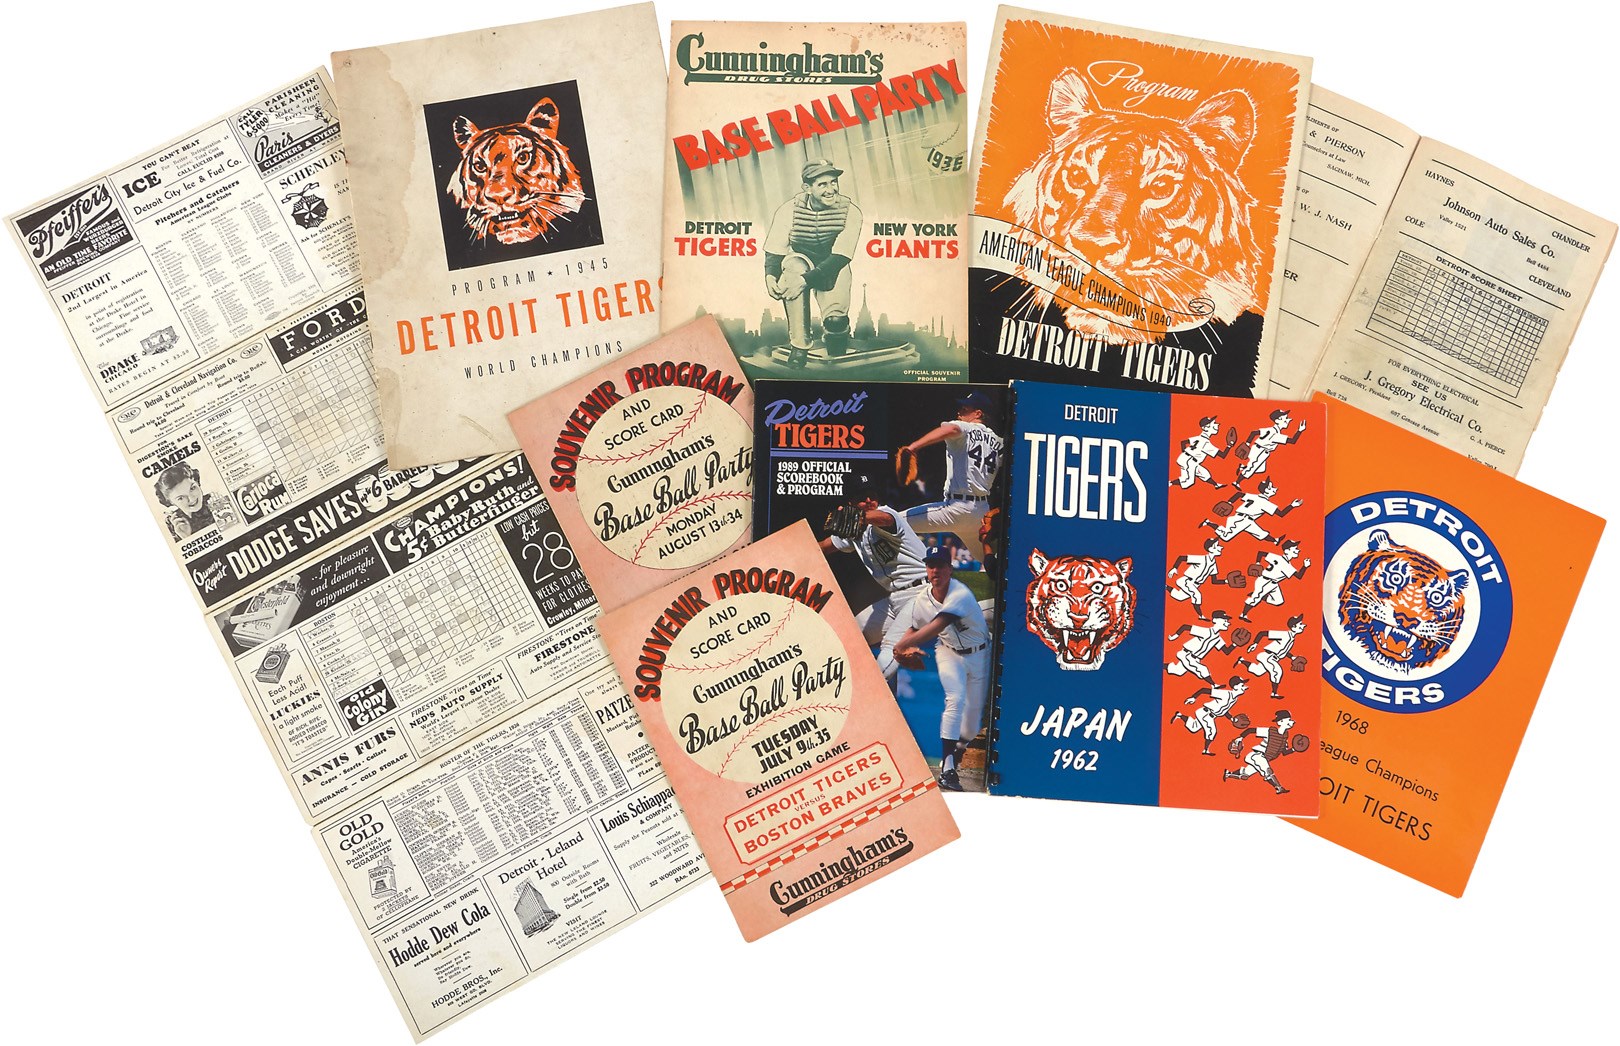 Ty Cobb and Detroit Tigers - Important Detroit Tigers Program Collection